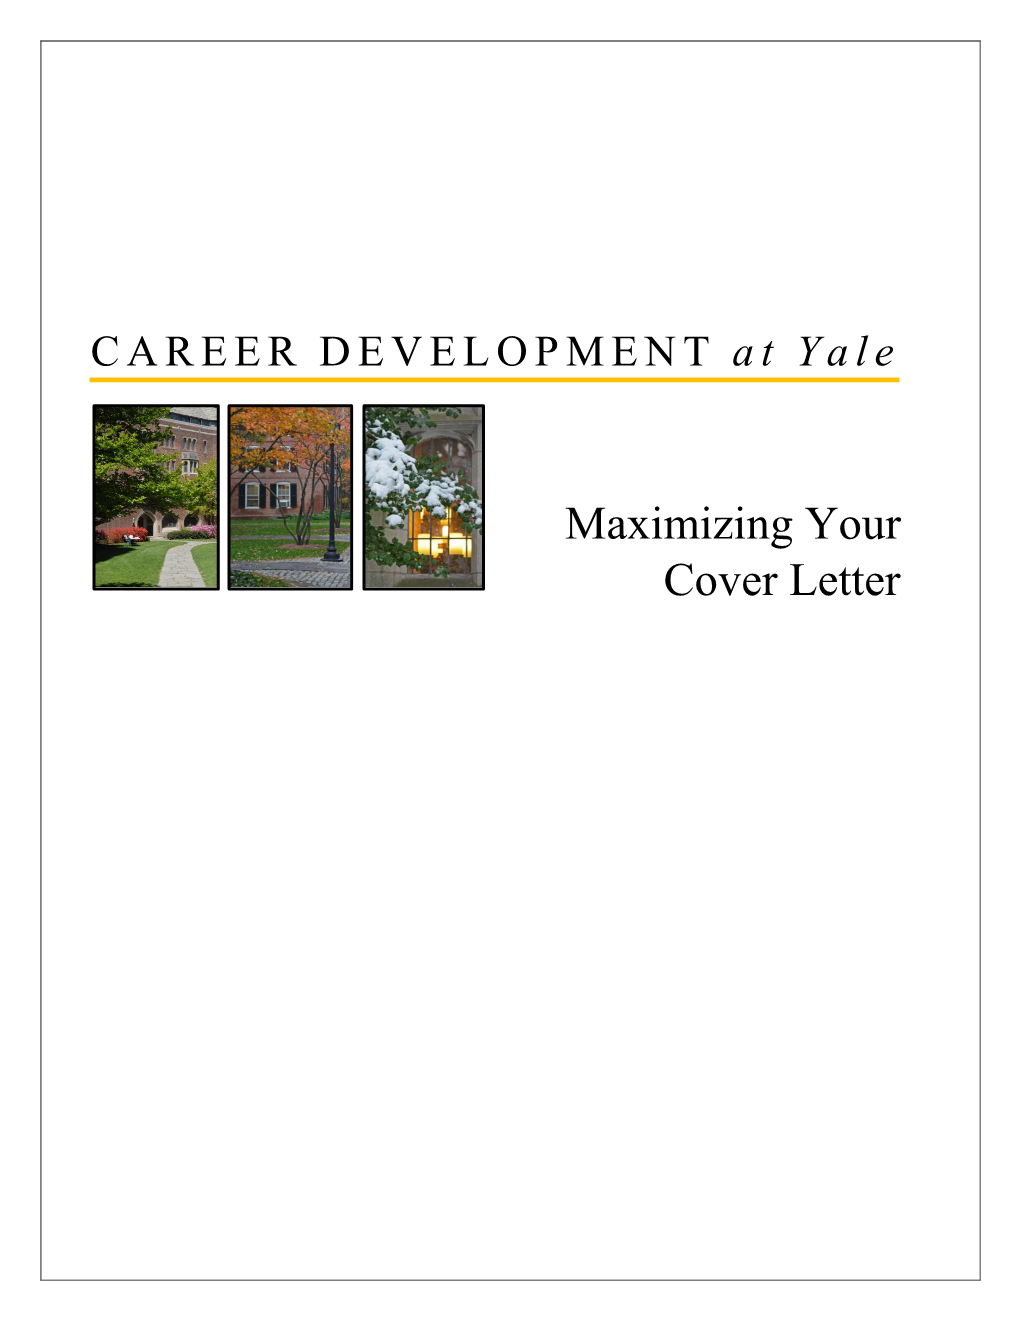 Maximizing Your Cover Letter